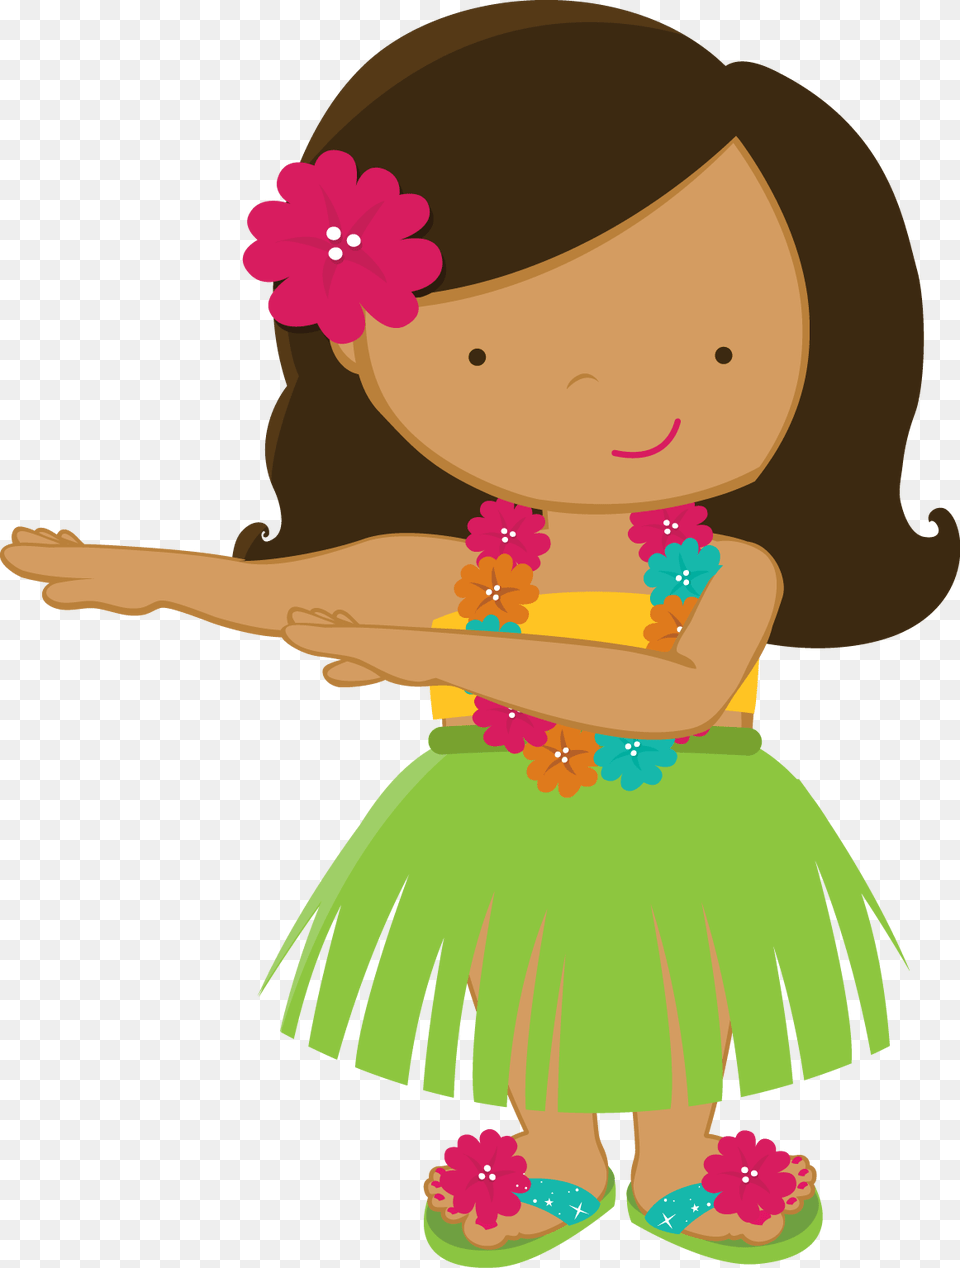 Cake Ideas Luau Clip Art And Hula, Flower, Plant, Accessories, Flower Arrangement Free Png Download